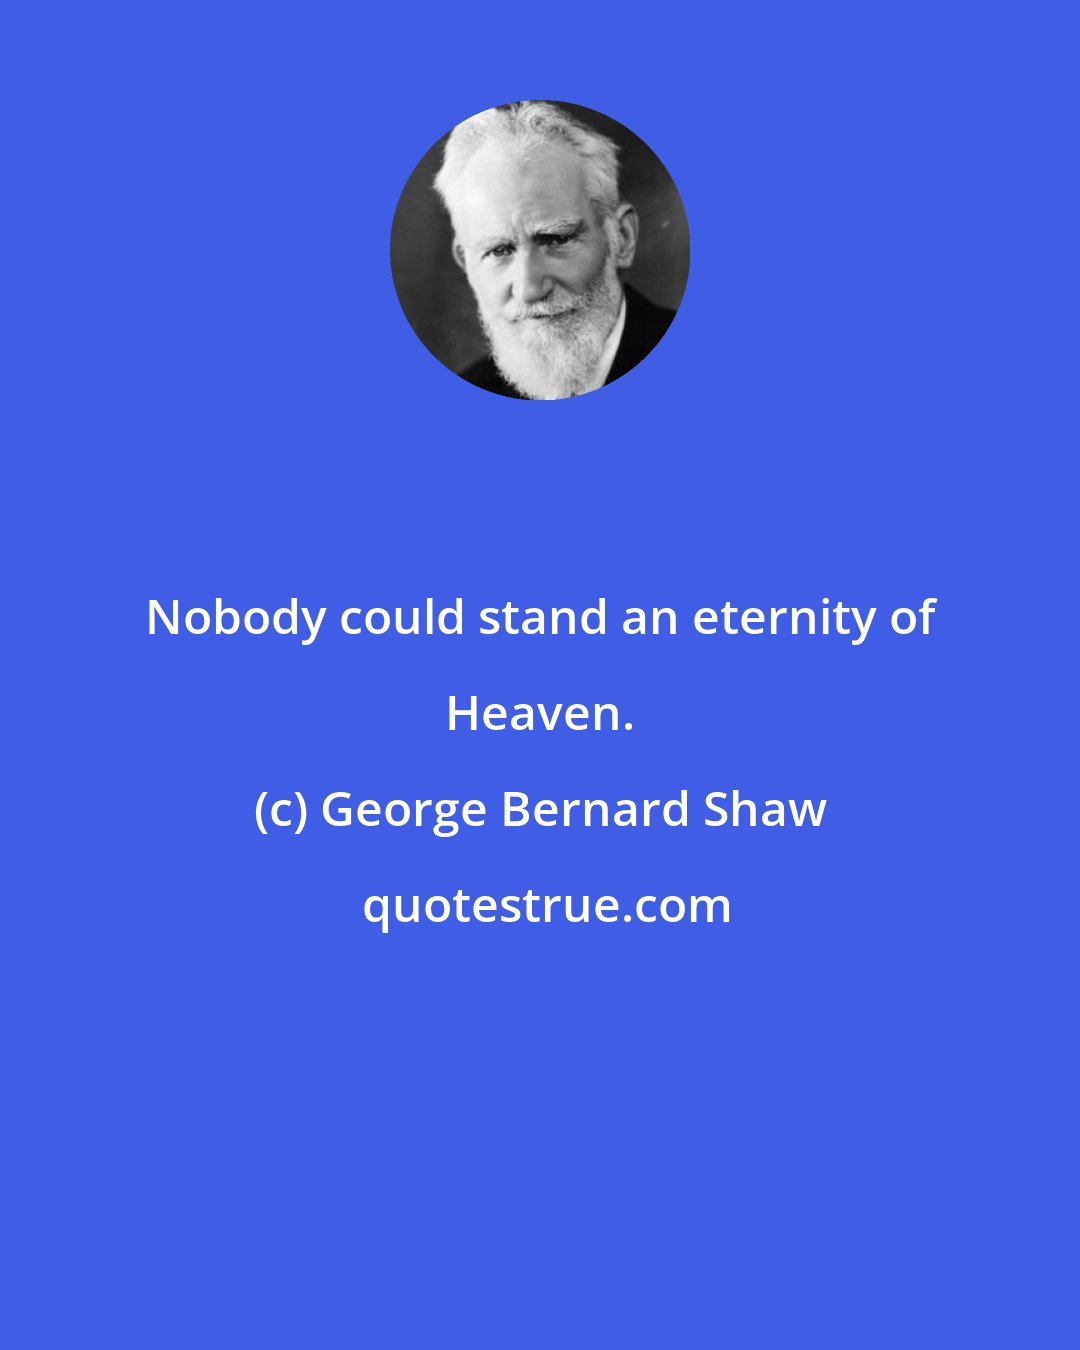 George Bernard Shaw: Nobody could stand an eternity of Heaven.